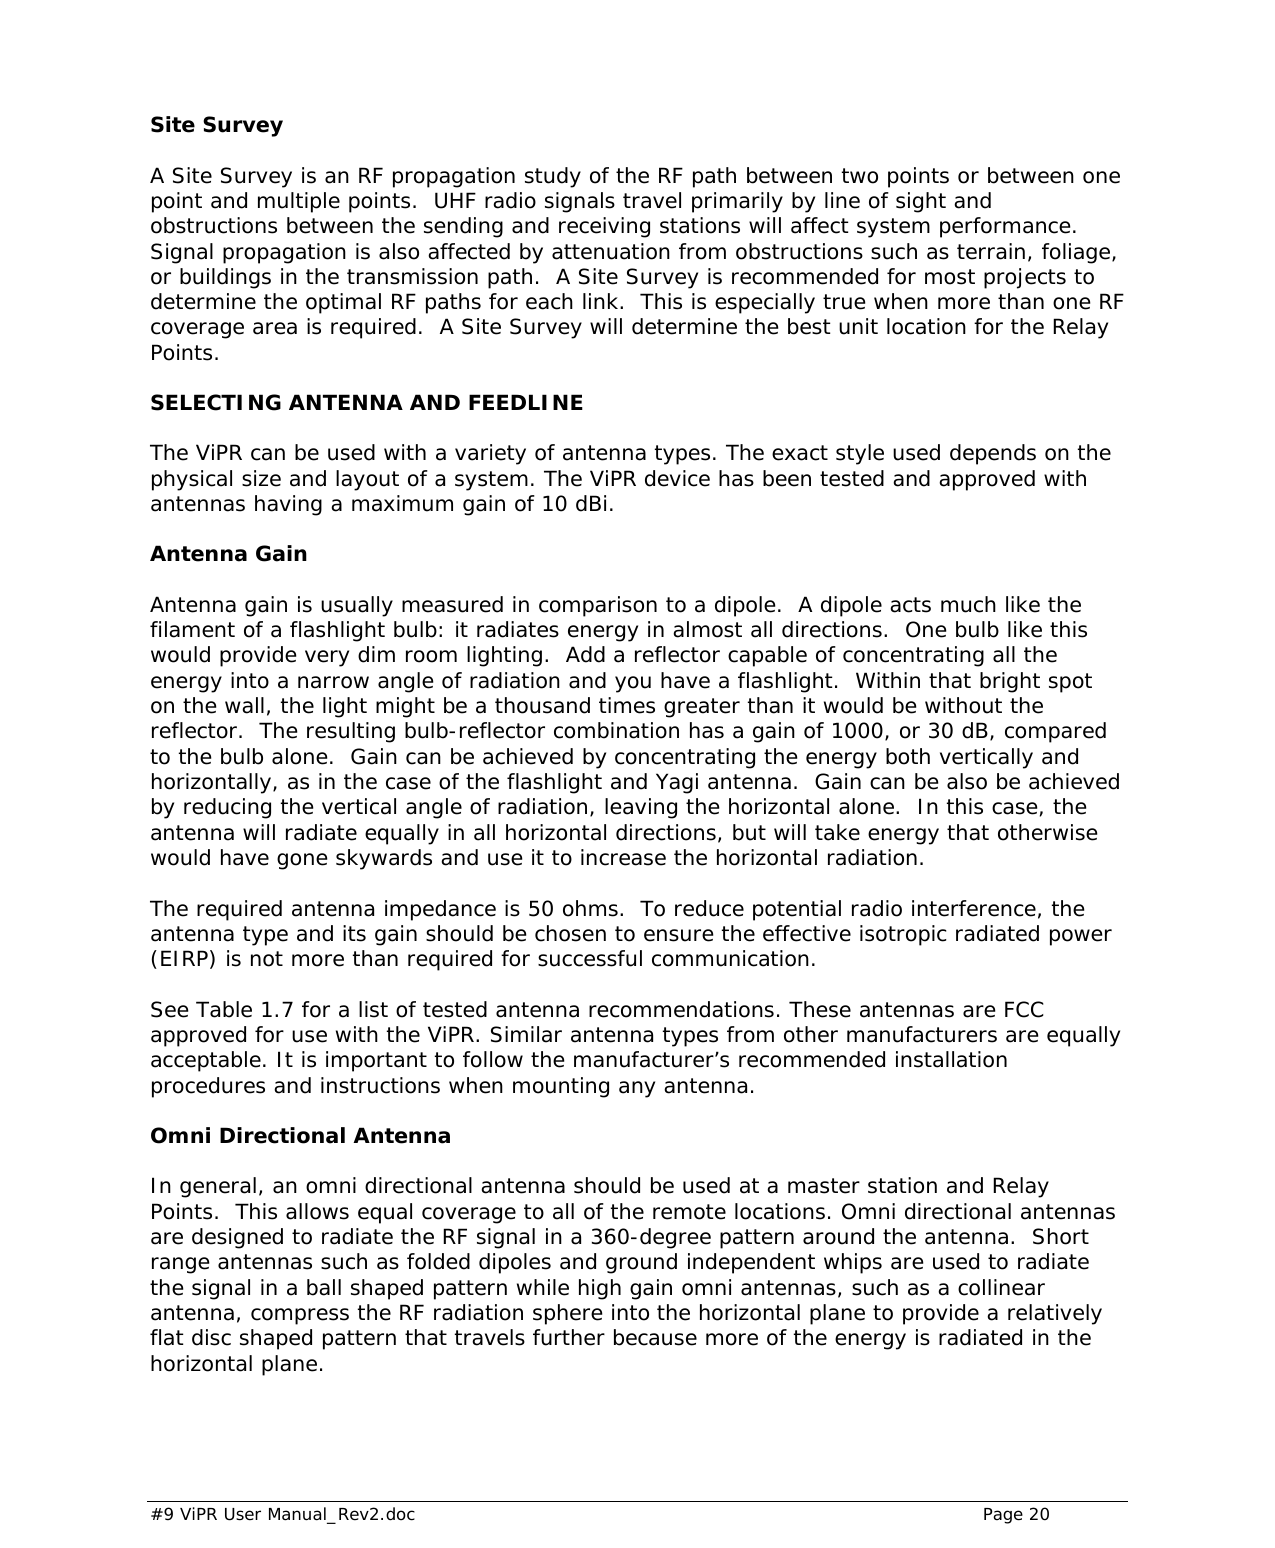  #9 ViPR User Manual_Rev2.doc    Page 20  Site Survey A Site Survey is an RF propagation study of the RF path between two points or between one point and multiple points.  UHF radio signals travel primarily by line of sight and obstructions between the sending and receiving stations will affect system performance.  Signal propagation is also affected by attenuation from obstructions such as terrain, foliage, or buildings in the transmission path.  A Site Survey is recommended for most projects to determine the optimal RF paths for each link.  This is especially true when more than one RF coverage area is required.  A Site Survey will determine the best unit location for the Relay Points.  SELECTING ANTENNA AND FEEDLINE The ViPR can be used with a variety of antenna types. The exact style used depends on the physical size and layout of a system. The ViPR device has been tested and approved with antennas having a maximum gain of 10 dBi.  Antenna Gain Antenna gain is usually measured in comparison to a dipole.  A dipole acts much like the filament of a flashlight bulb: it radiates energy in almost all directions.  One bulb like this would provide very dim room lighting.  Add a reflector capable of concentrating all the energy into a narrow angle of radiation and you have a flashlight.  Within that bright spot on the wall, the light might be a thousand times greater than it would be without the reflector.  The resulting bulb-reflector combination has a gain of 1000, or 30 dB, compared to the bulb alone.  Gain can be achieved by concentrating the energy both vertically and horizontally, as in the case of the flashlight and Yagi antenna.  Gain can be also be achieved by reducing the vertical angle of radiation, leaving the horizontal alone.  In this case, the antenna will radiate equally in all horizontal directions, but will take energy that otherwise would have gone skywards and use it to increase the horizontal radiation.  The required antenna impedance is 50 ohms.  To reduce potential radio interference, the antenna type and its gain should be chosen to ensure the effective isotropic radiated power (EIRP) is not more than required for successful communication.  See Table 1.7 for a list of tested antenna recommendations. These antennas are FCC approved for use with the ViPR. Similar antenna types from other manufacturers are equally acceptable. It is important to follow the manufacturer’s recommended installation procedures and instructions when mounting any antenna.  Omni Directional Antenna In general, an omni directional antenna should be used at a master station and Relay Points.  This allows equal coverage to all of the remote locations. Omni directional antennas are designed to radiate the RF signal in a 360-degree pattern around the antenna.  Short range antennas such as folded dipoles and ground independent whips are used to radiate the signal in a ball shaped pattern while high gain omni antennas, such as a collinear antenna, compress the RF radiation sphere into the horizontal plane to provide a relatively flat disc shaped pattern that travels further because more of the energy is radiated in the horizontal plane.  